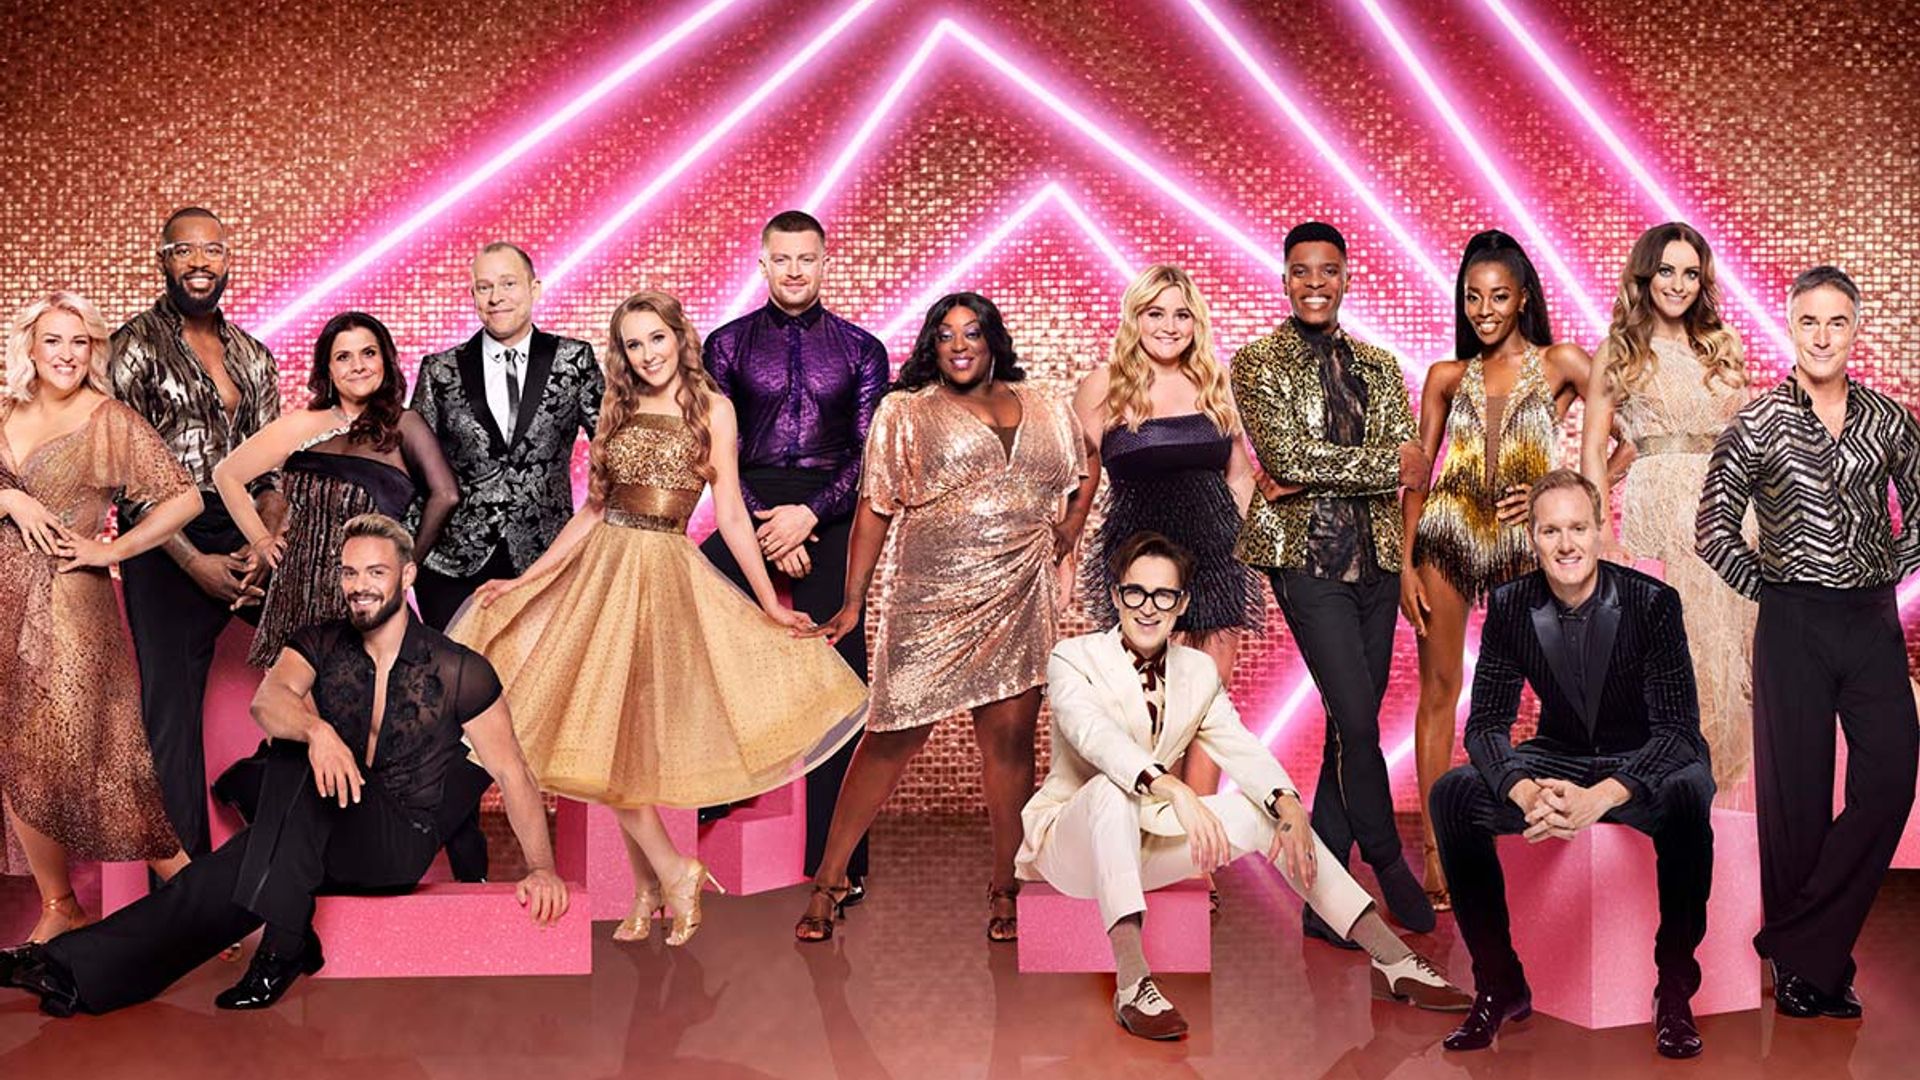 strictly come dancing full cast 2021